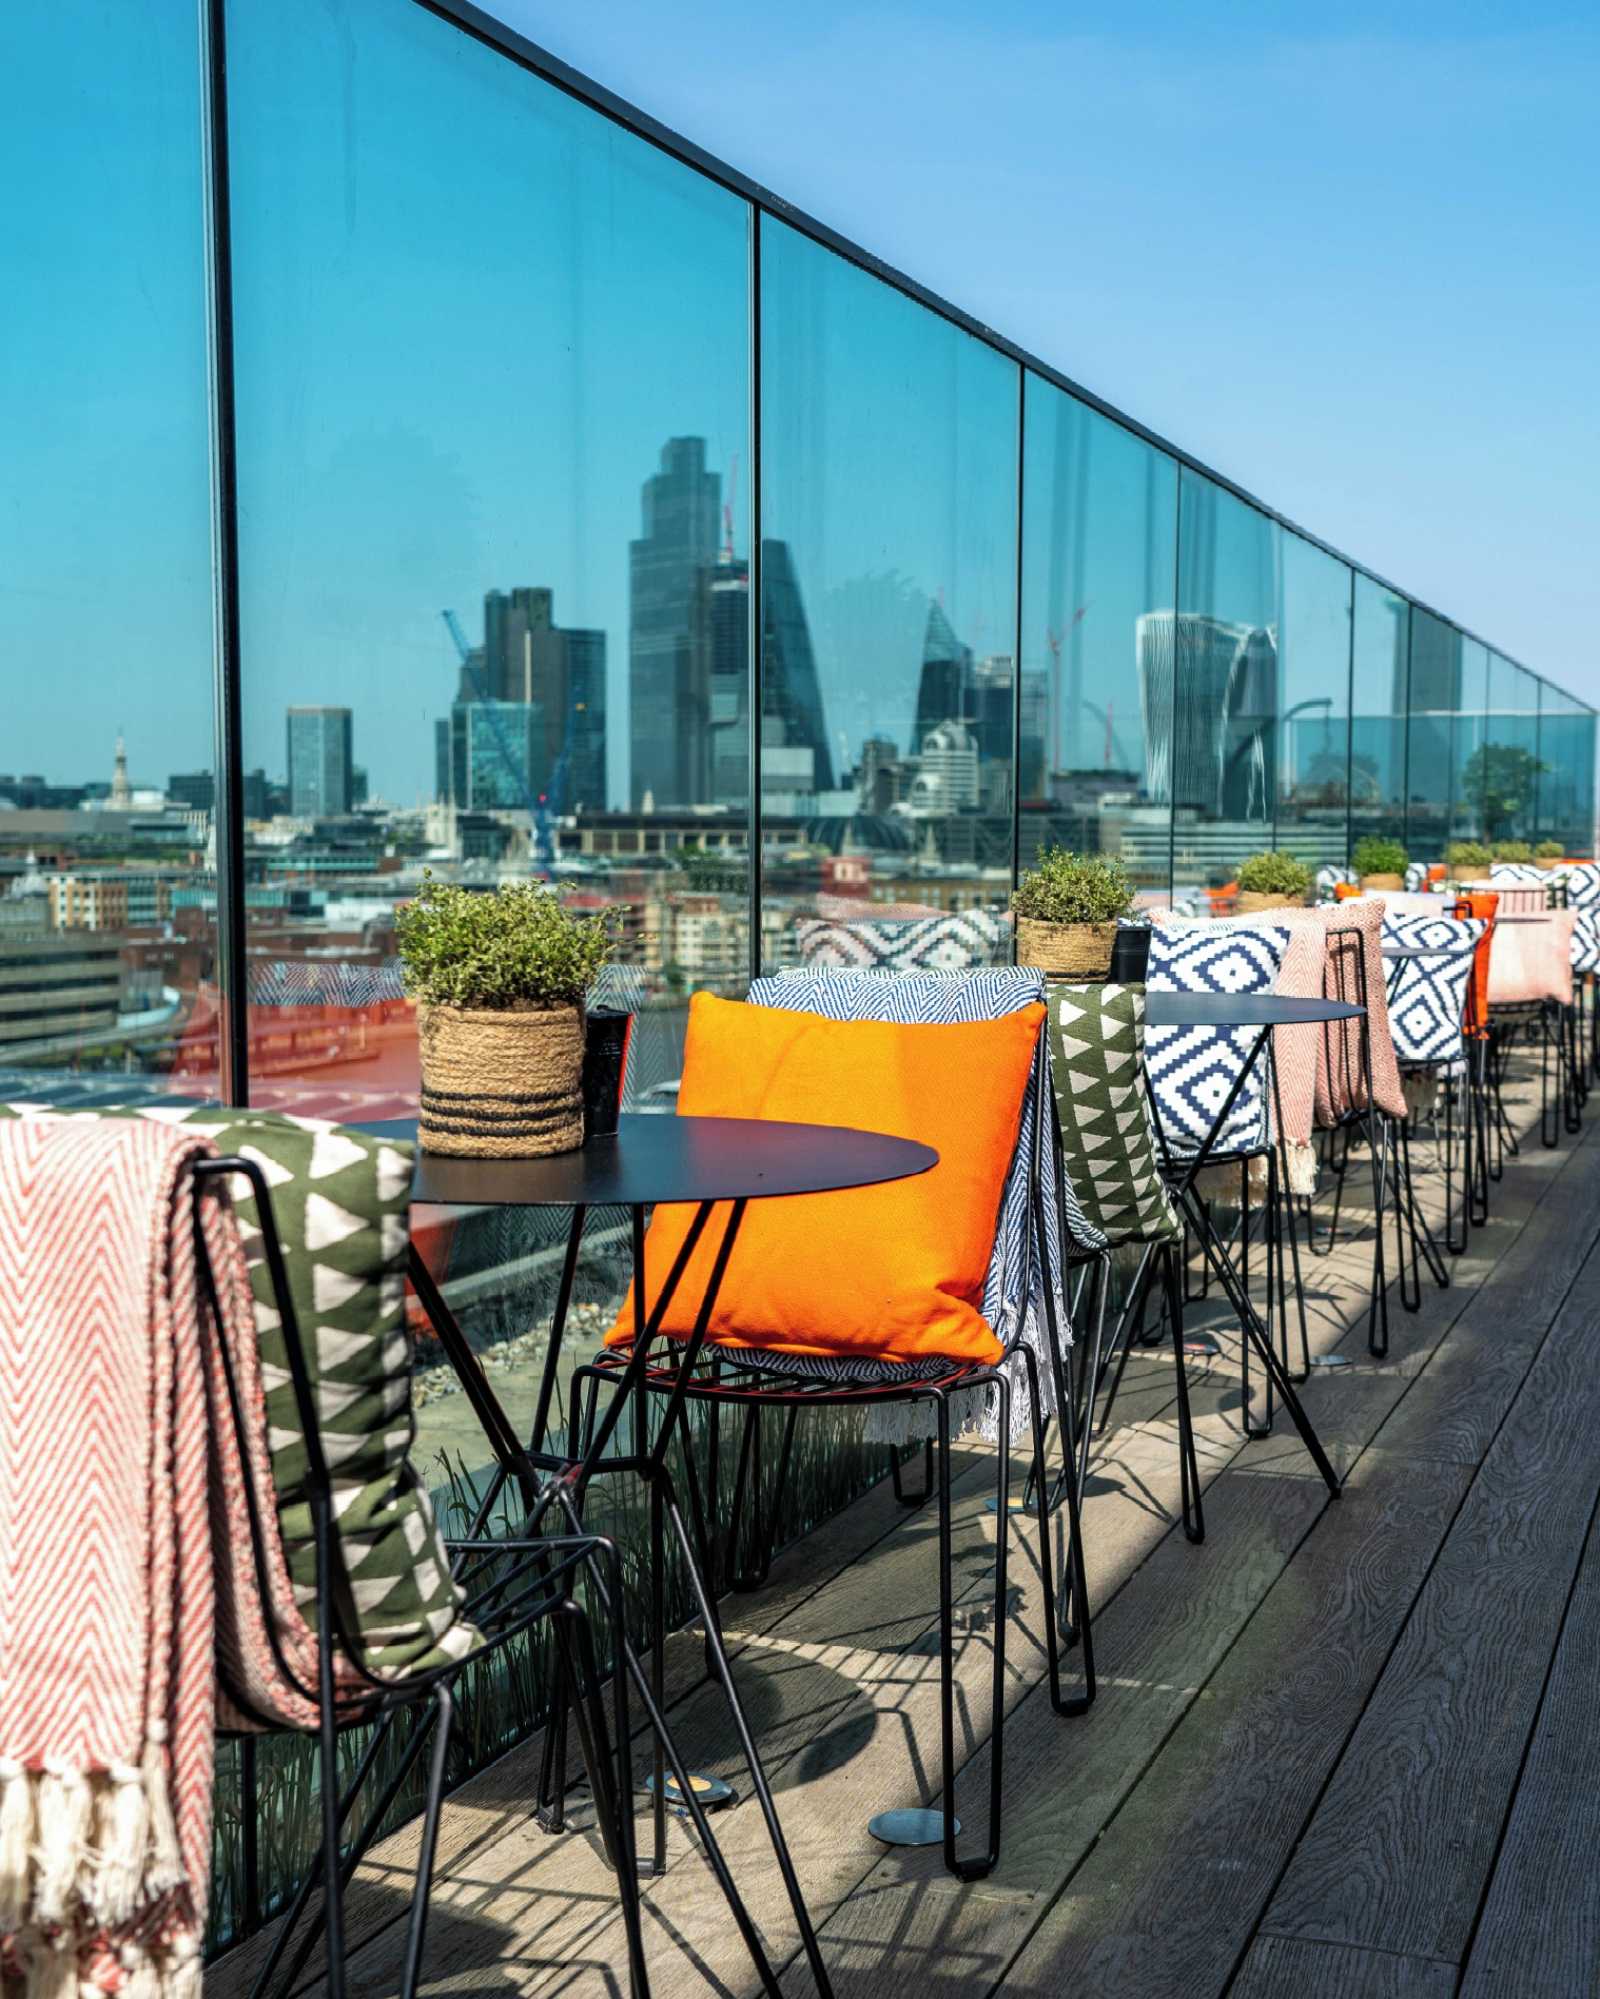 Rooftop 12th Knot - Sea containers in London - 3